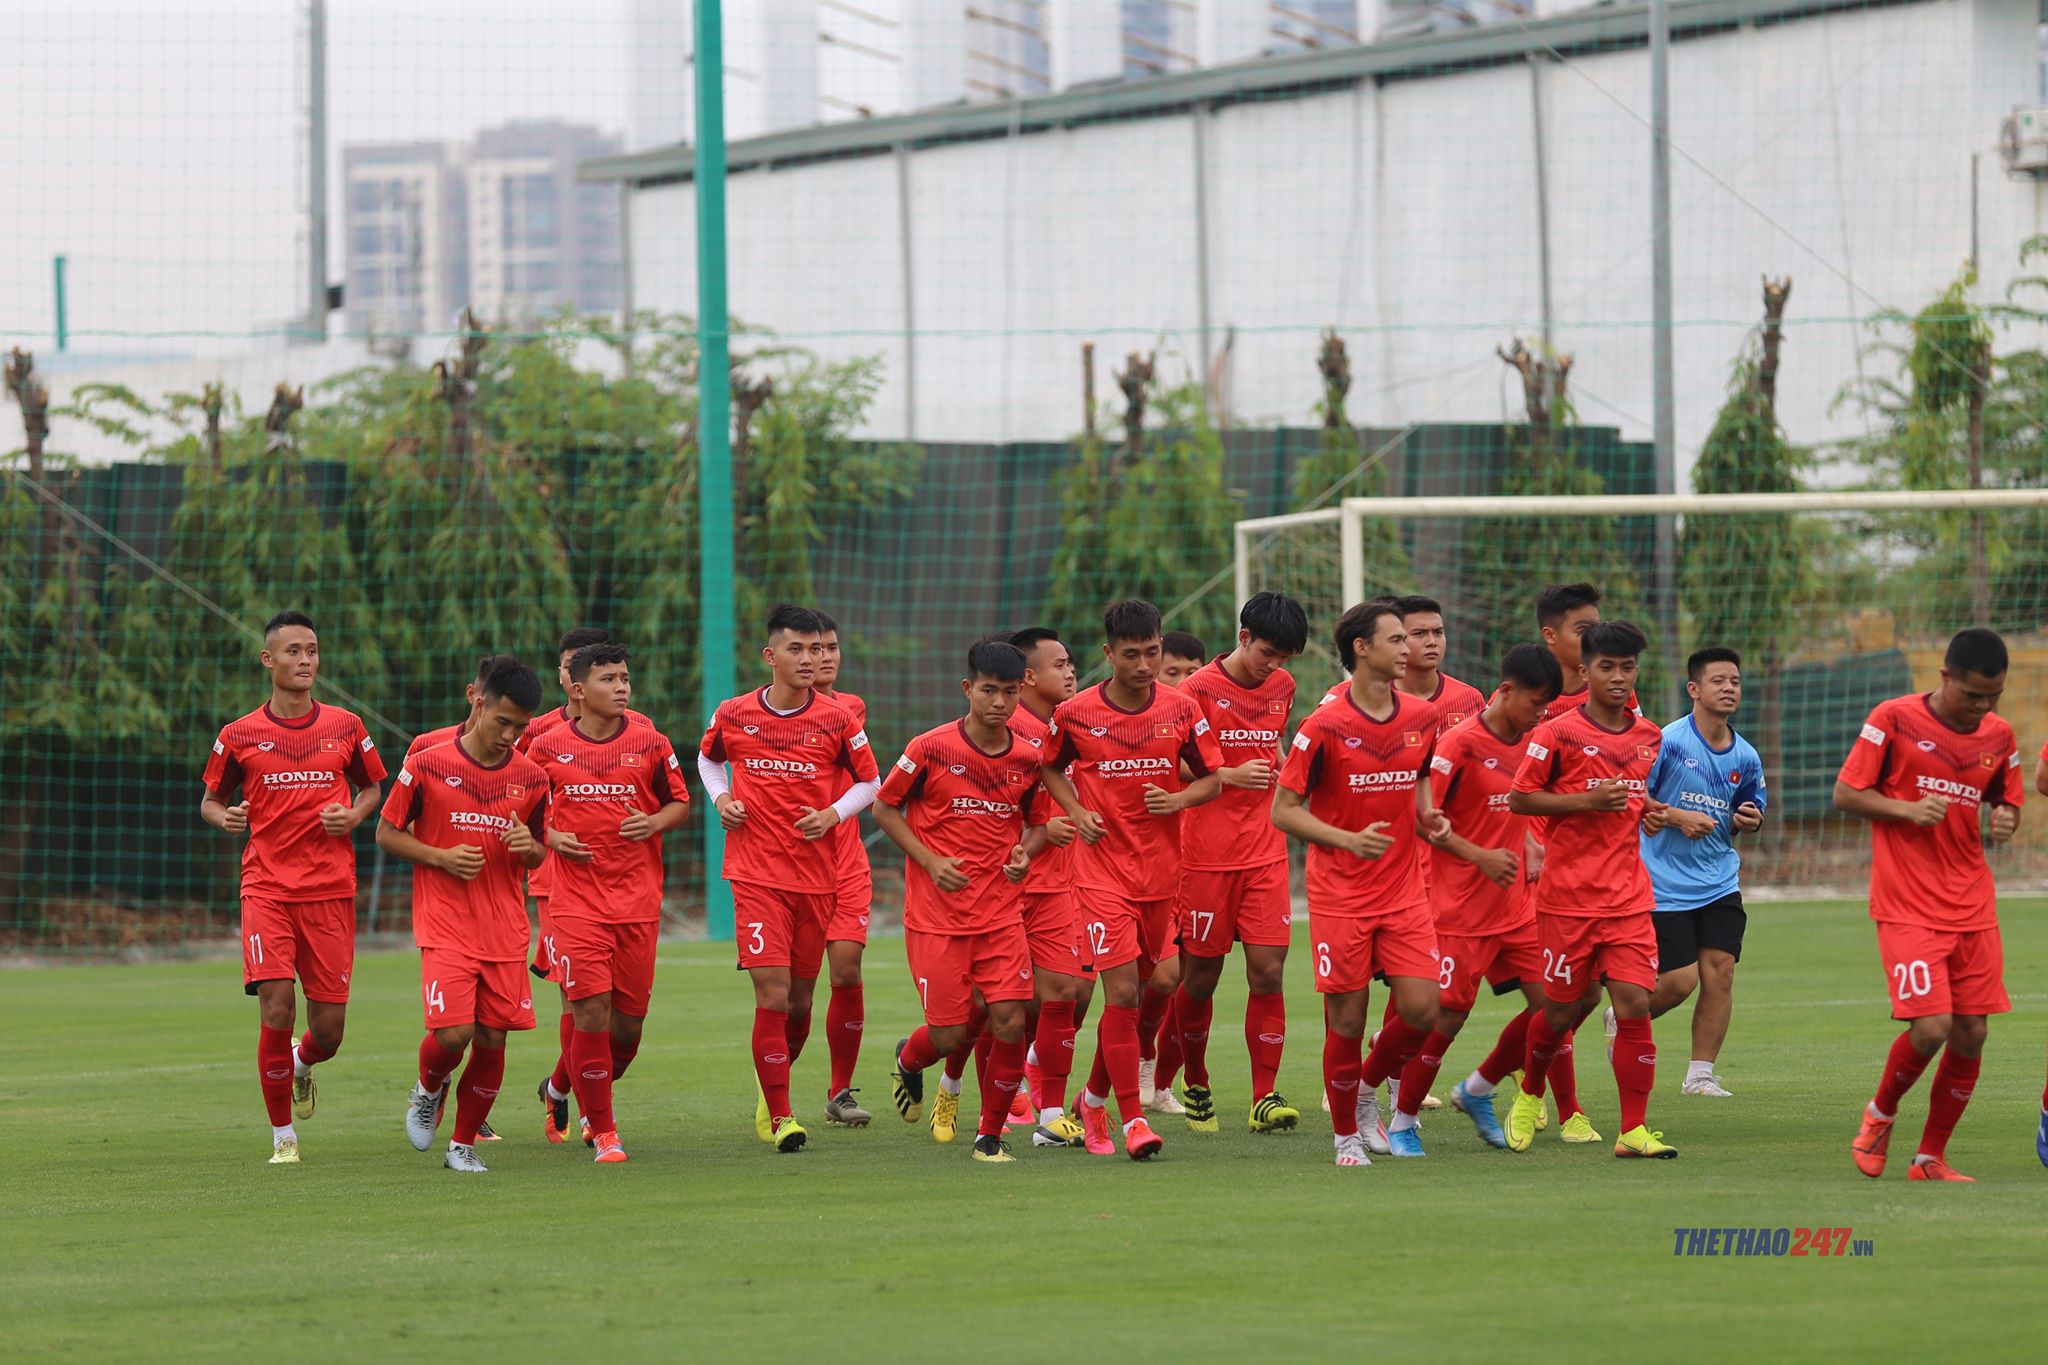 U22 Vietnam is sent to the friendly in France.